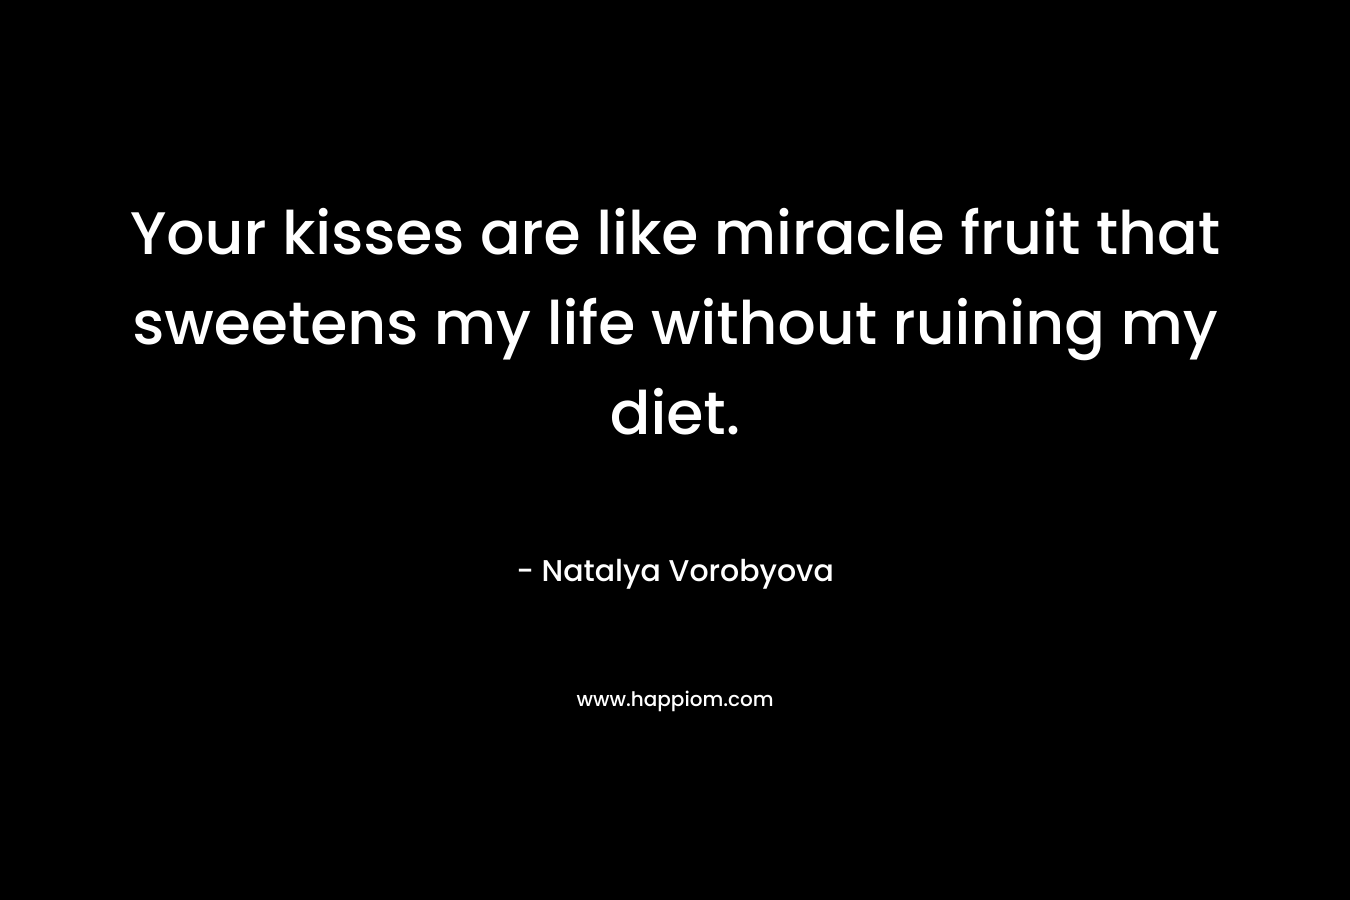 Your kisses are like miracle fruit that sweetens my life without ruining my diet.